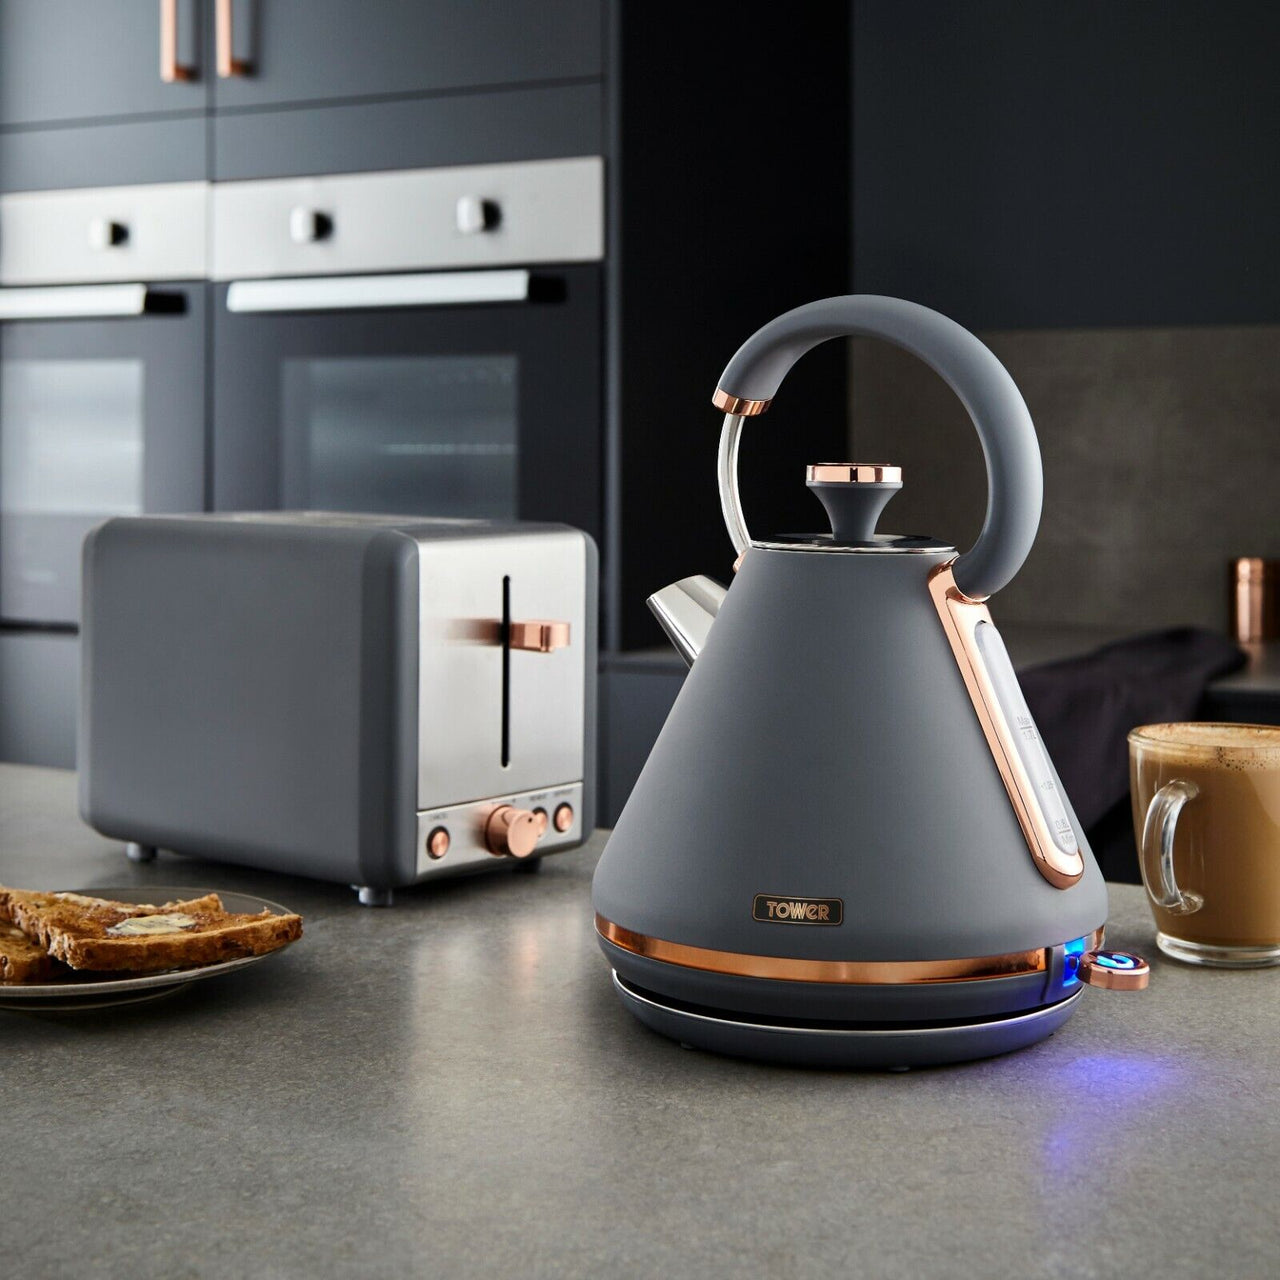 Tower Cavaletto Pyramid Kettle 2 Slice Toaster & 3 piece Canisters Set Grey & Rose Gold